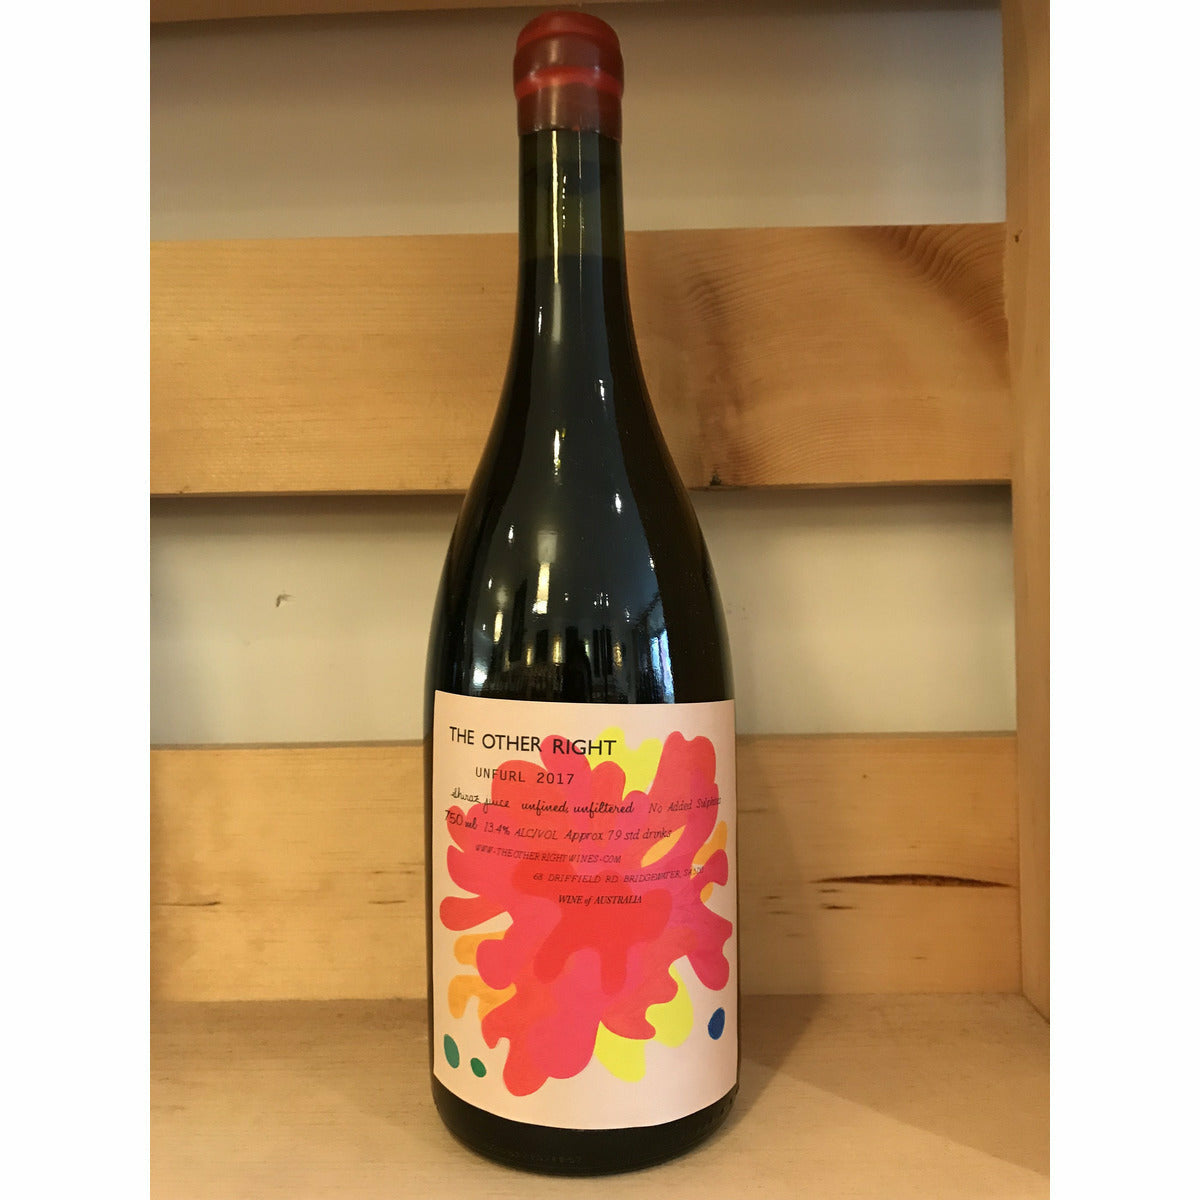 The Other Right "Unfurl" Shiraz 2017